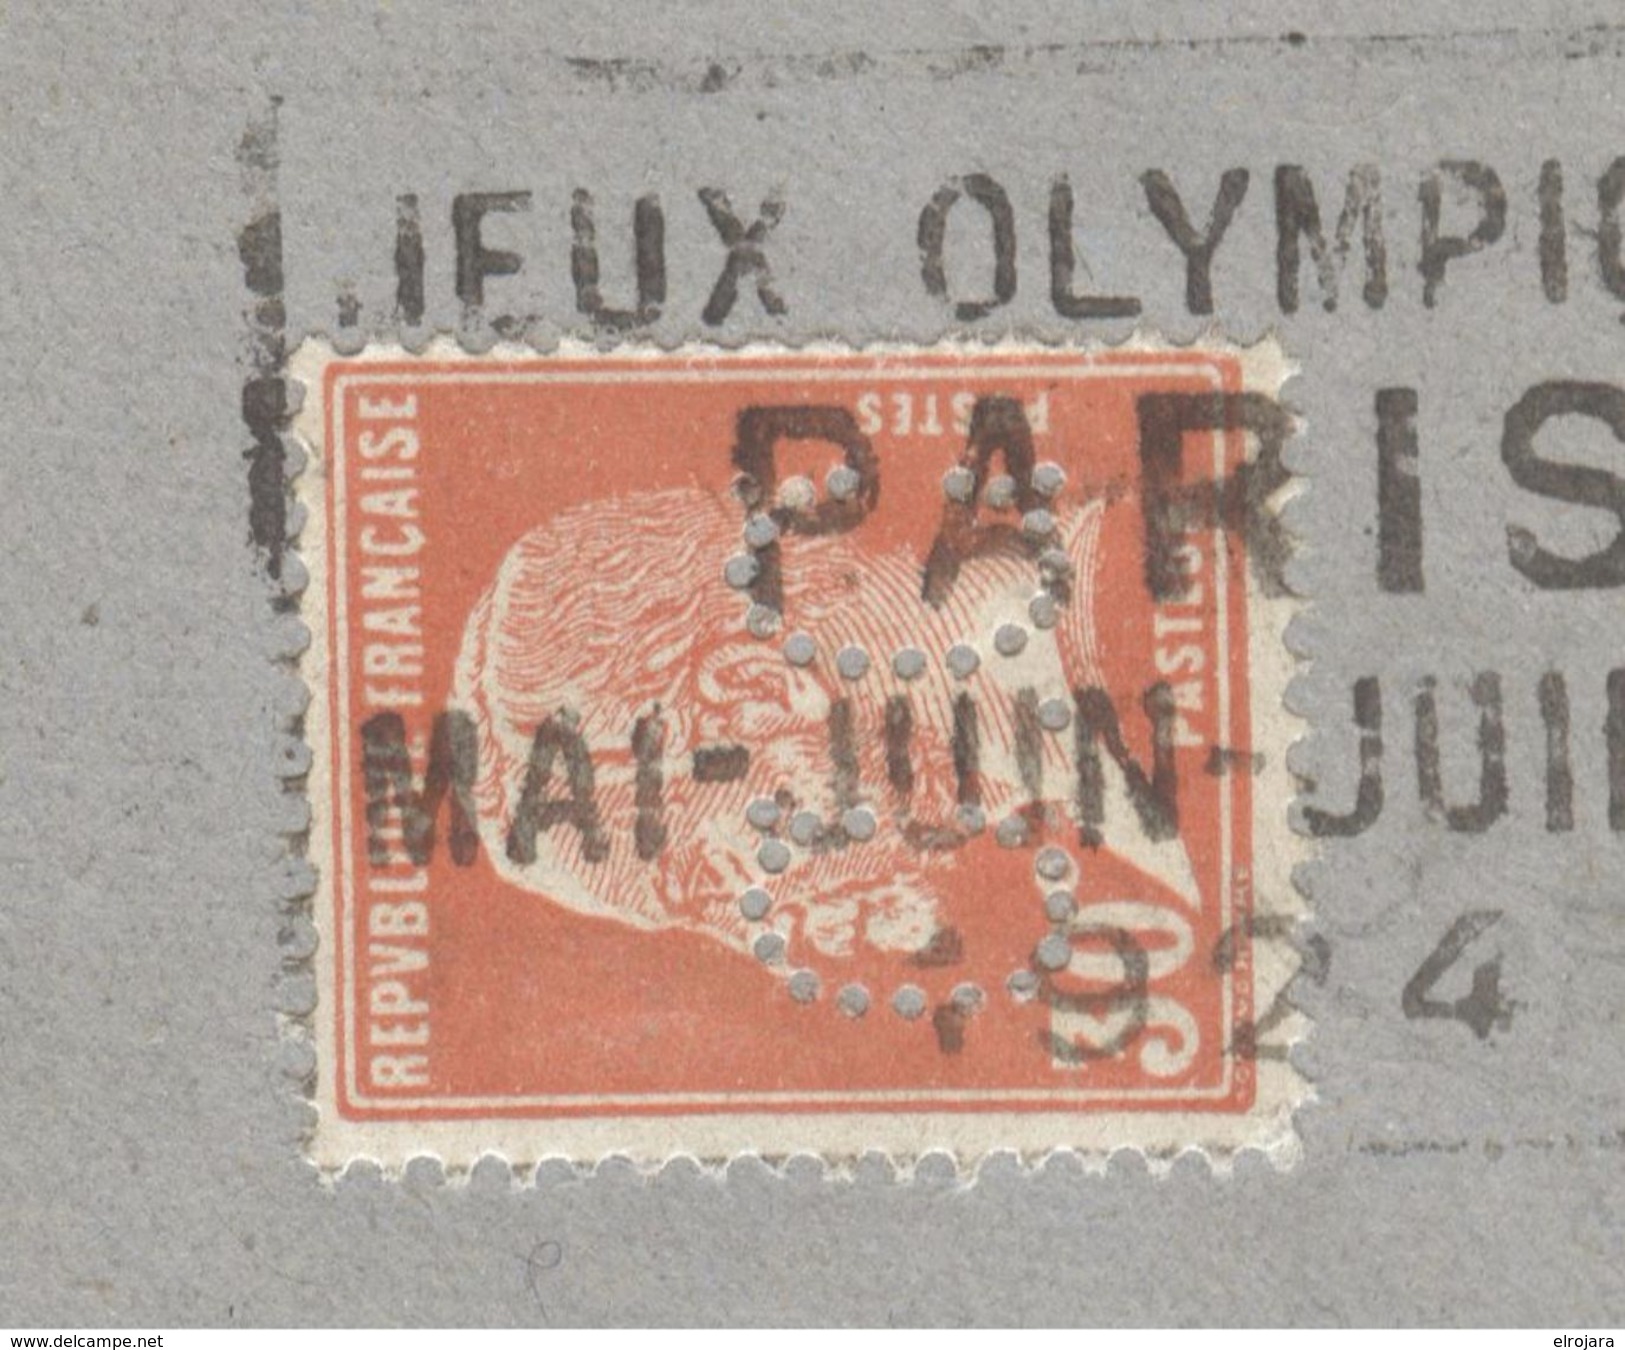 FRANCE PERFIN Stamp On Cover With Olympic Machine Cancel Paris Depart 24 VI 1924 To Switzerland - Estate 1924: Paris